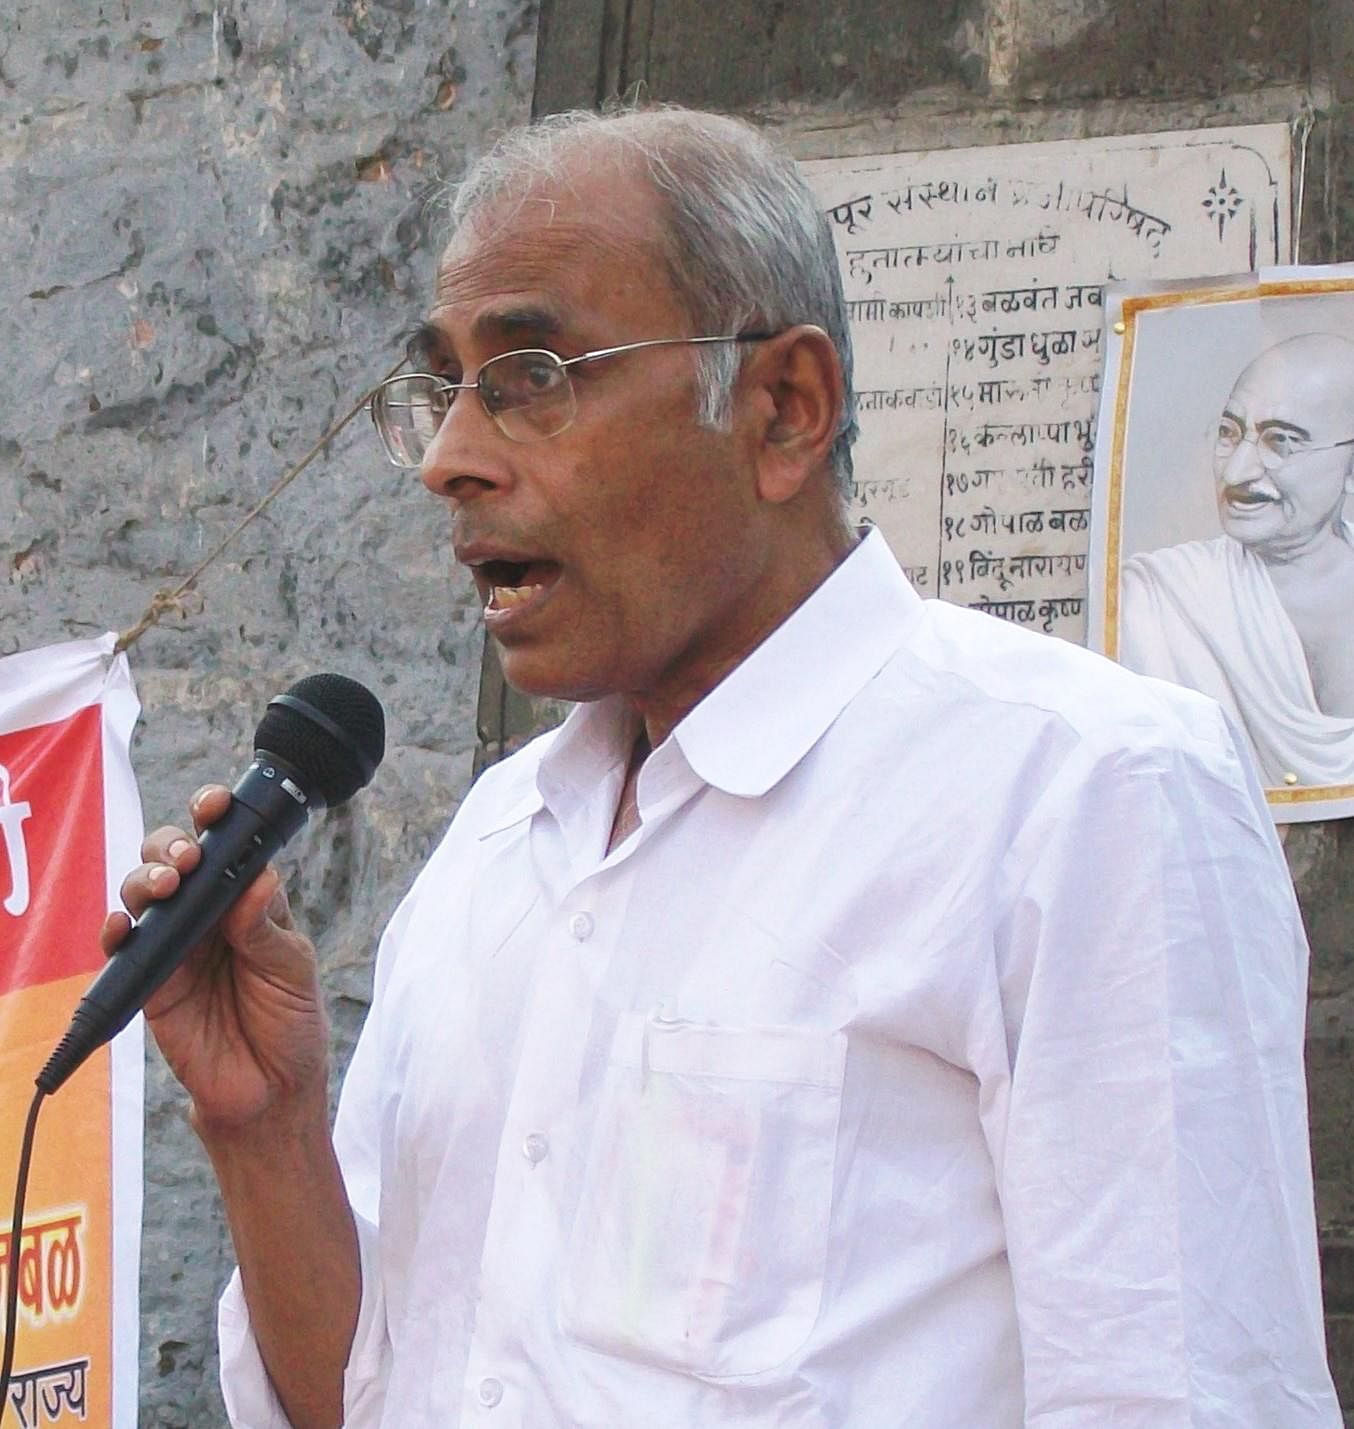 <div class="paragraphs"><p>A special court in Pune framed charges against 5 men accused in the murder of activist Dr Narendra Dabholkar.</p></div>